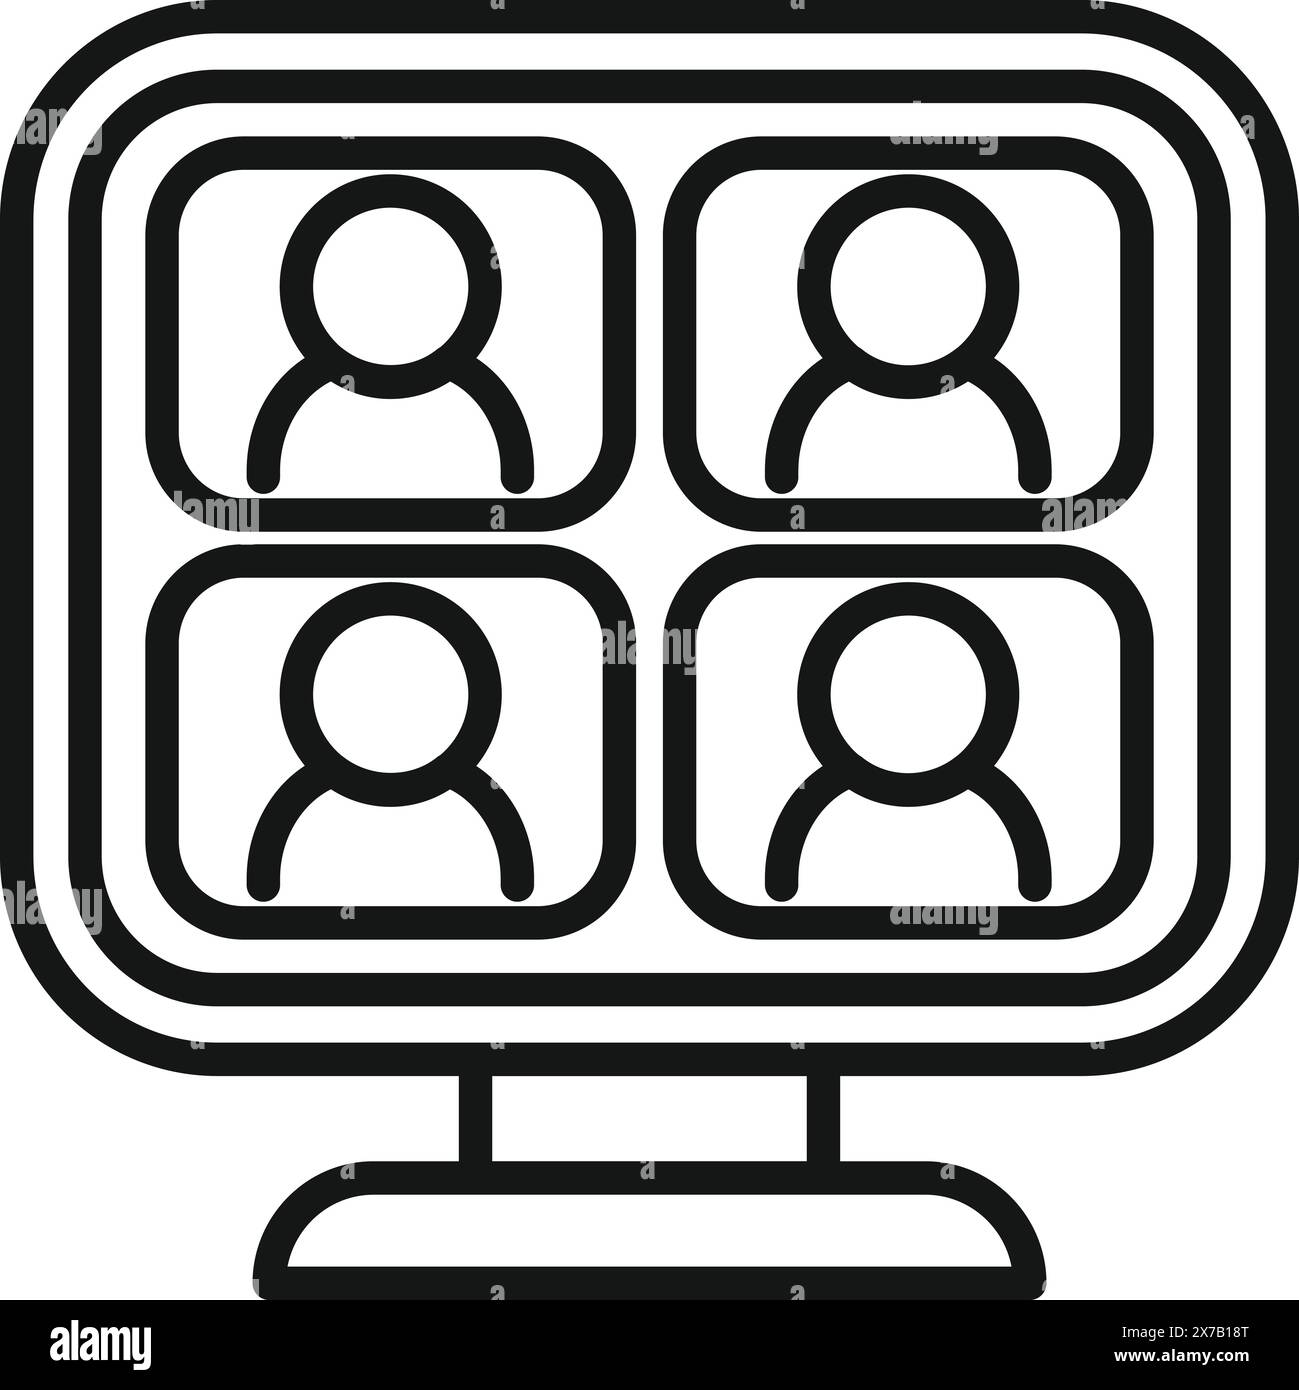 Symmetrical and minimalist online meeting icon illustration in vector format for user icons on digital screens, conference calls, webinars, and remote work Stock Vector